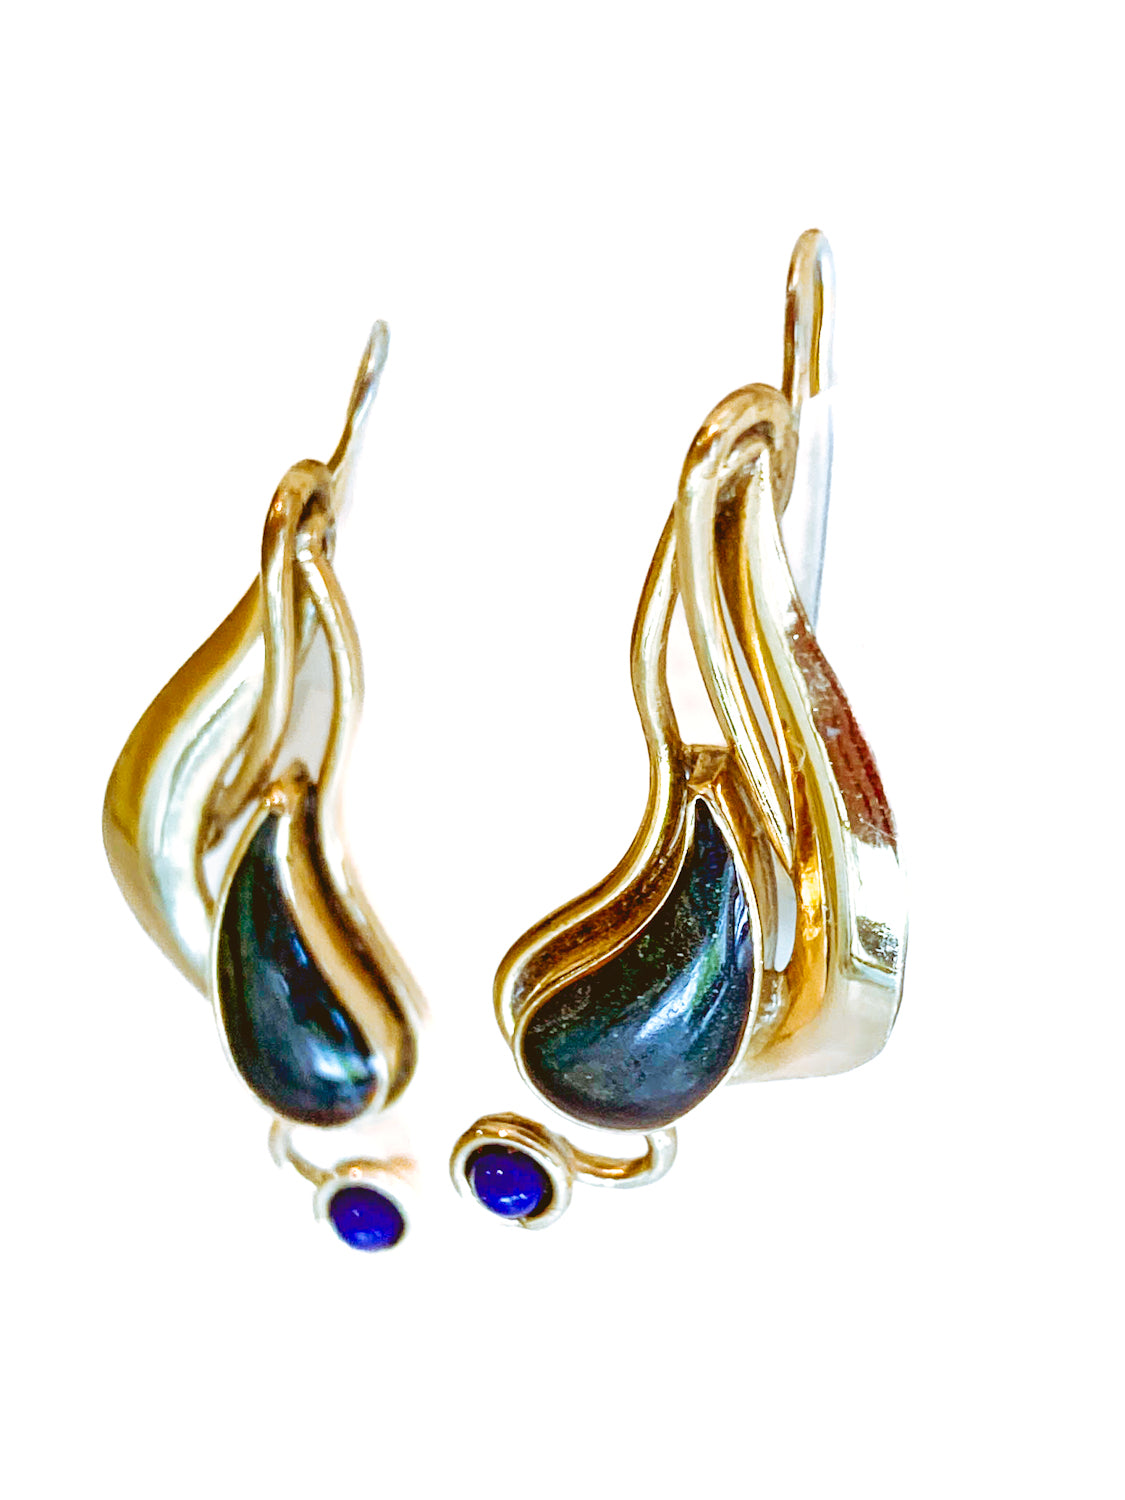 Vintage Abstract Gold Silver Tear Drop Green Blue Accent Drop Earrings 2